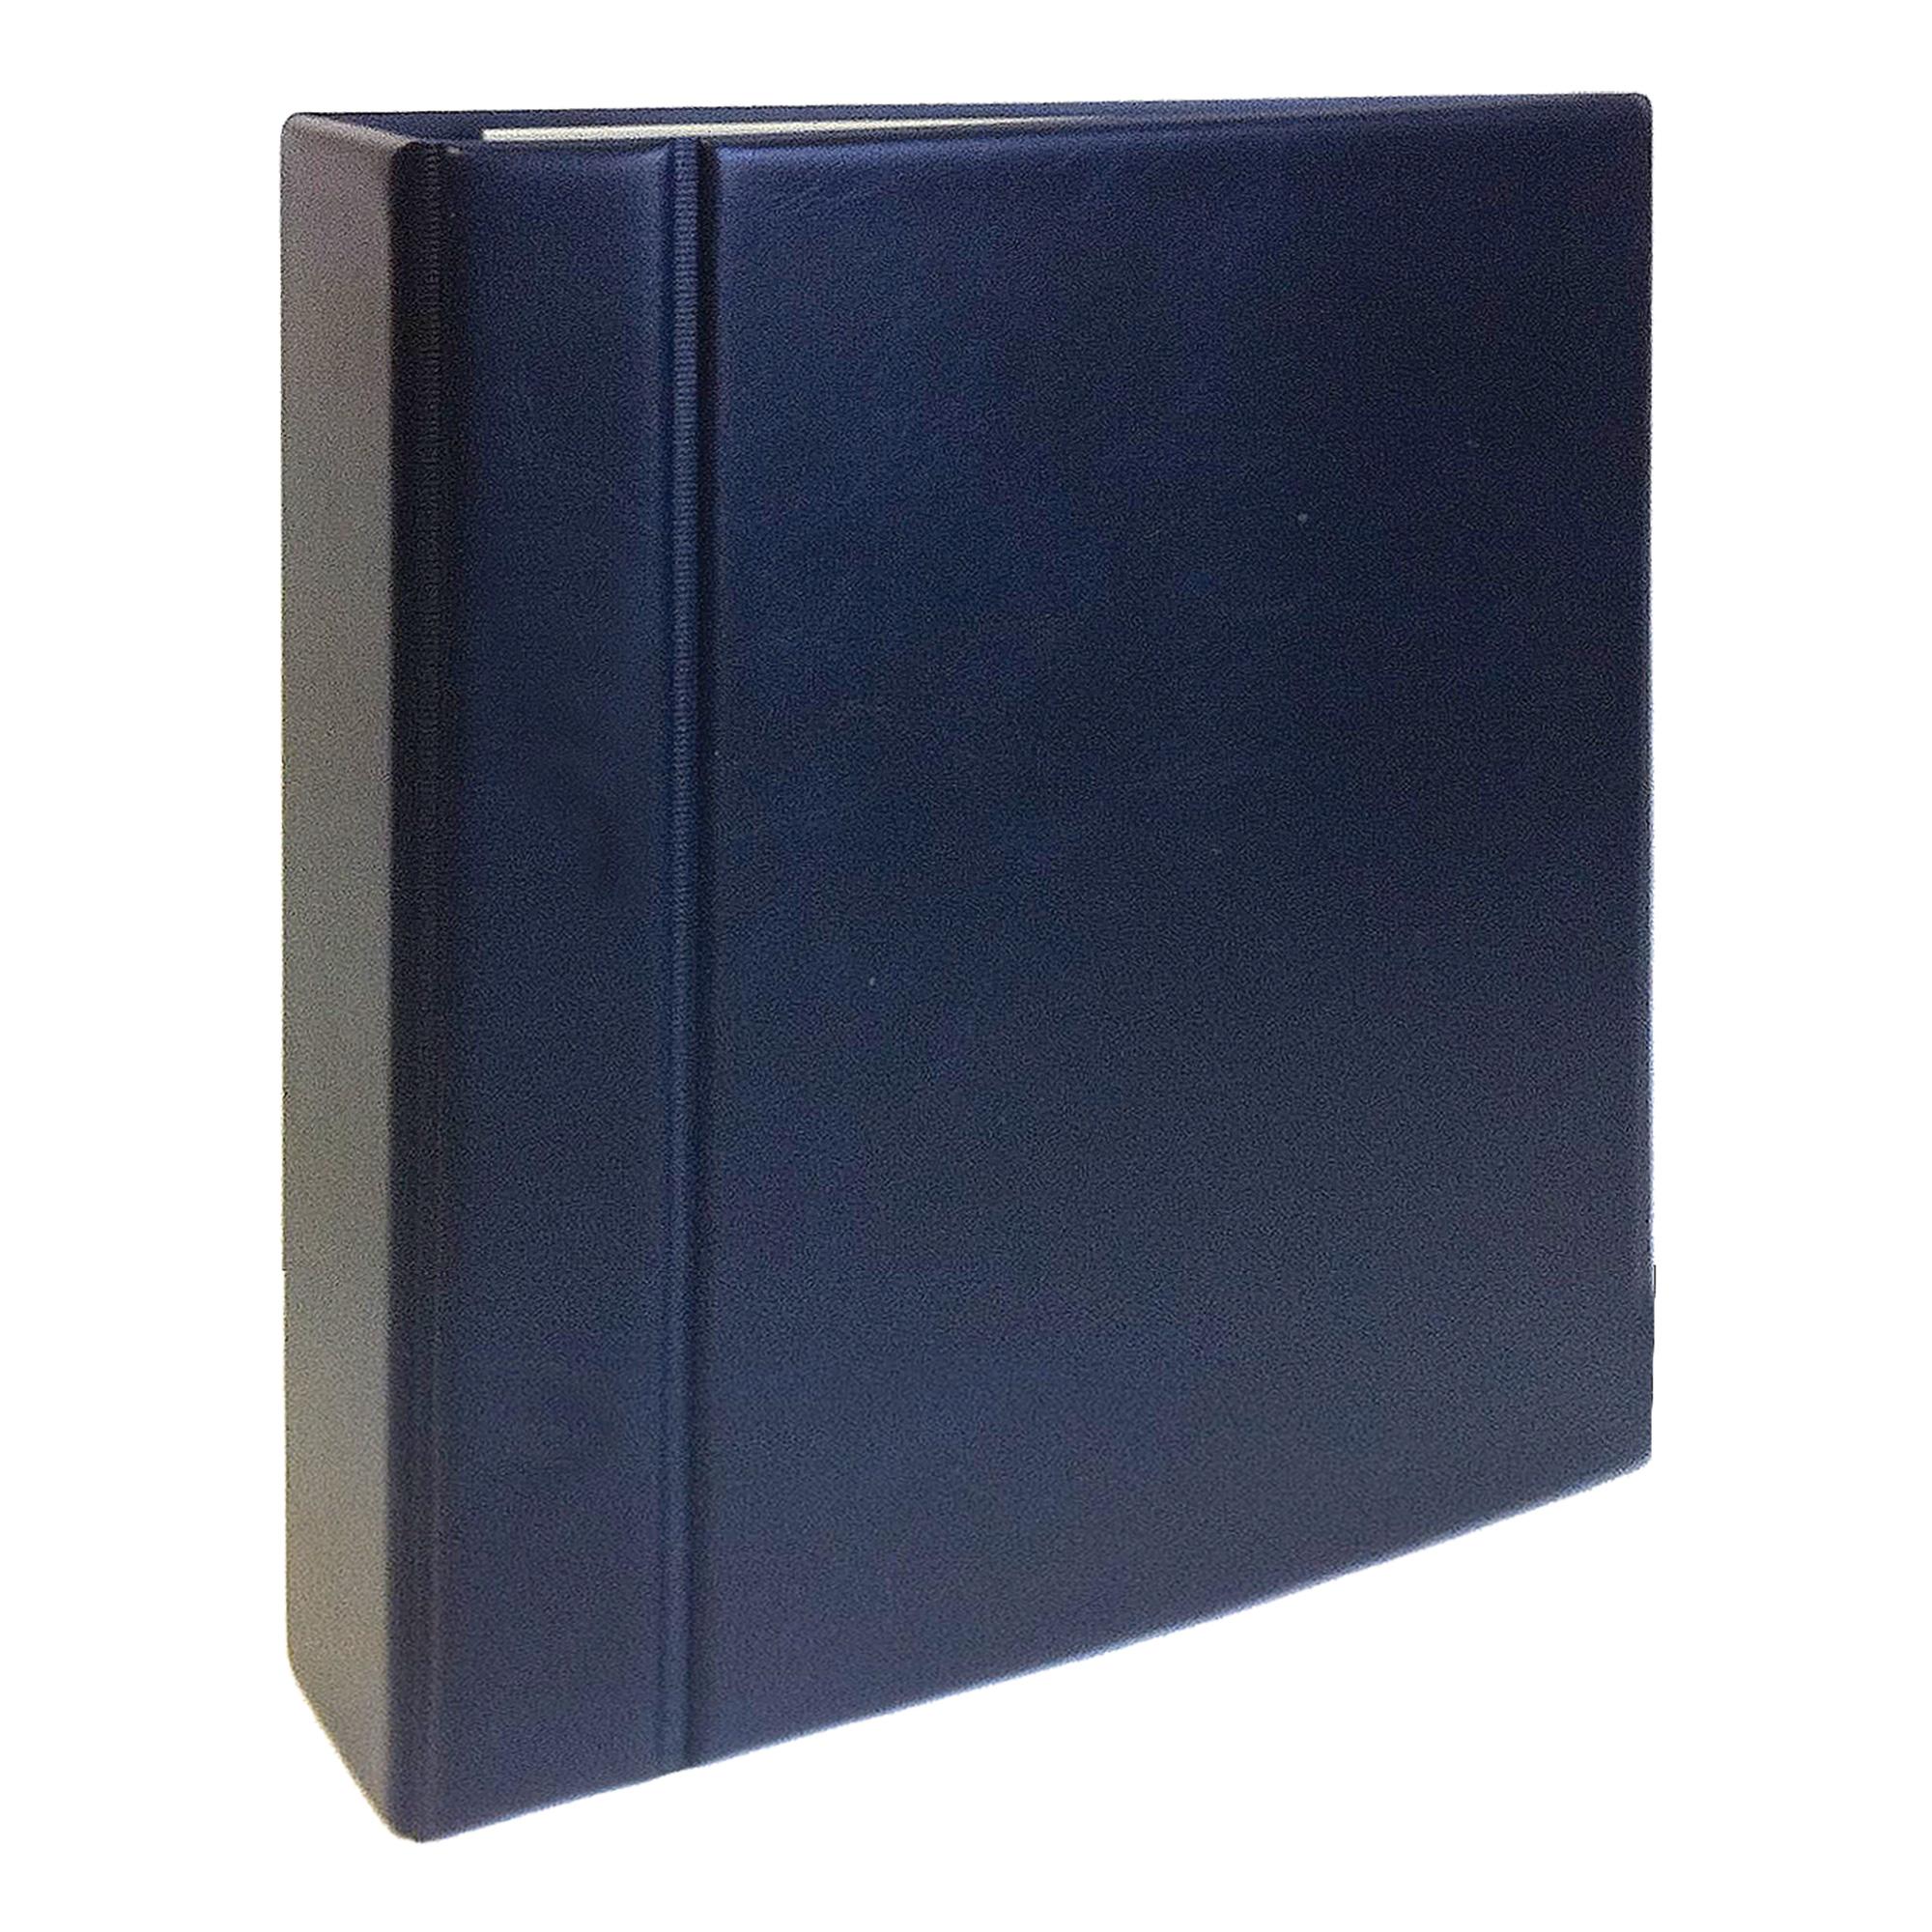 First Day Cover and Postcard Large Capacity Album Blue